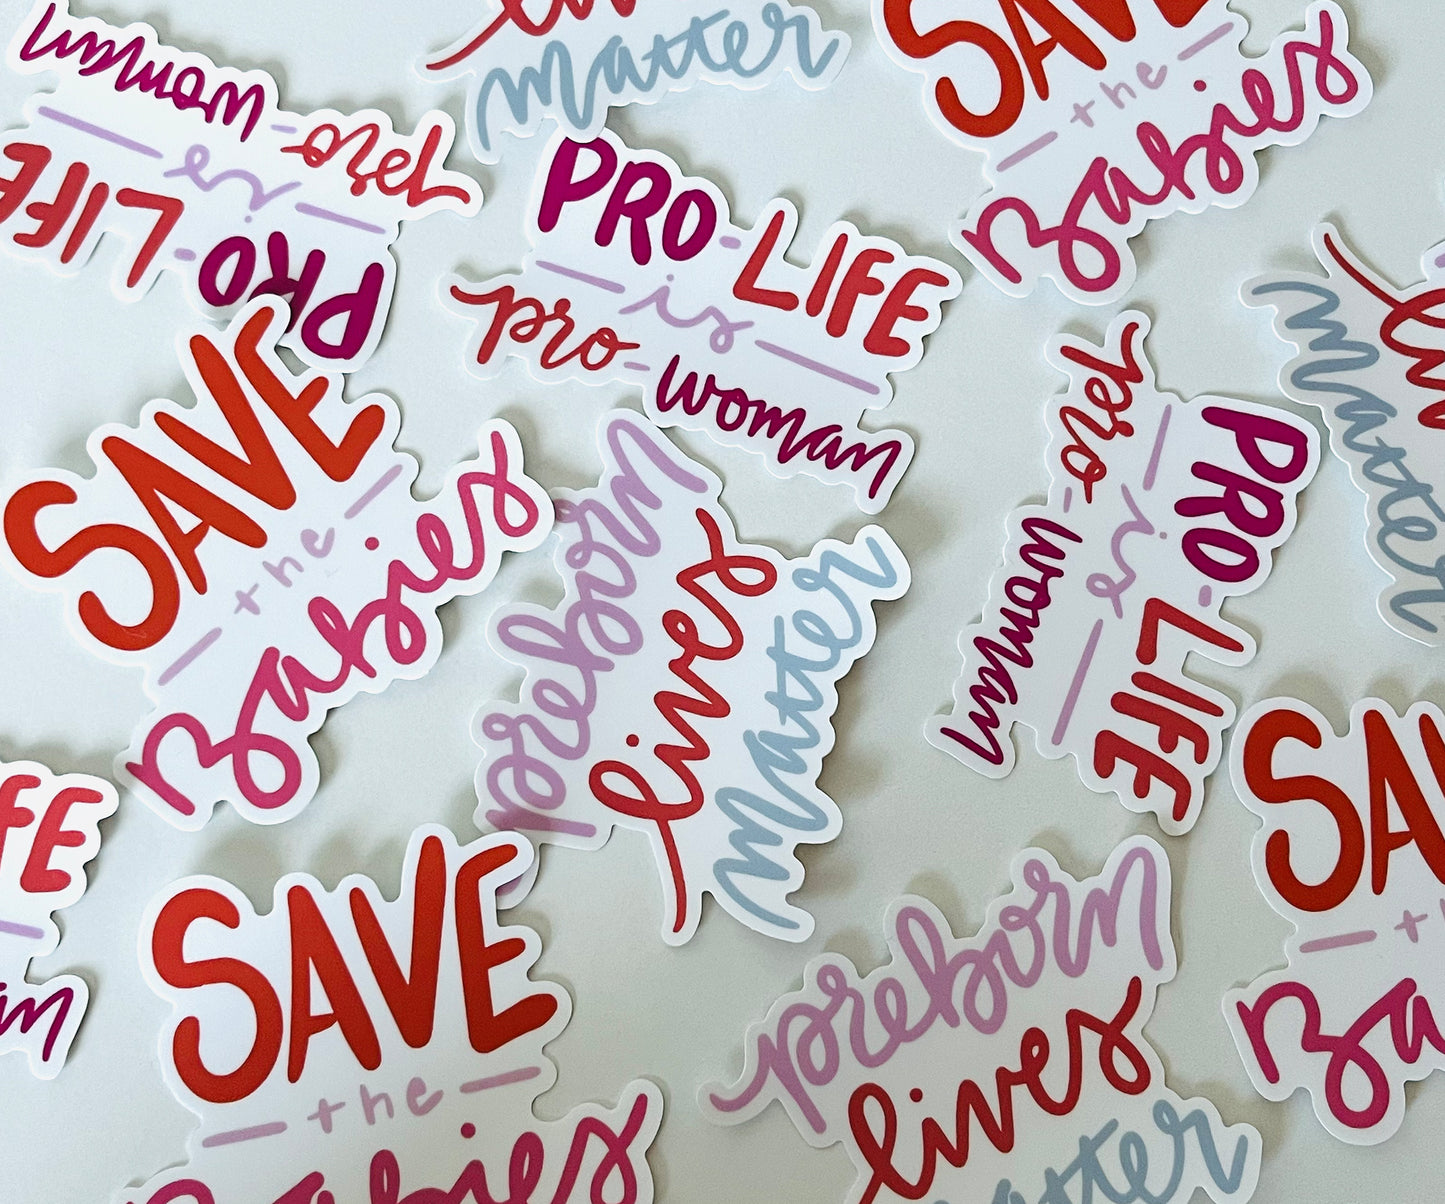 Save the Babies Sticker | Donation